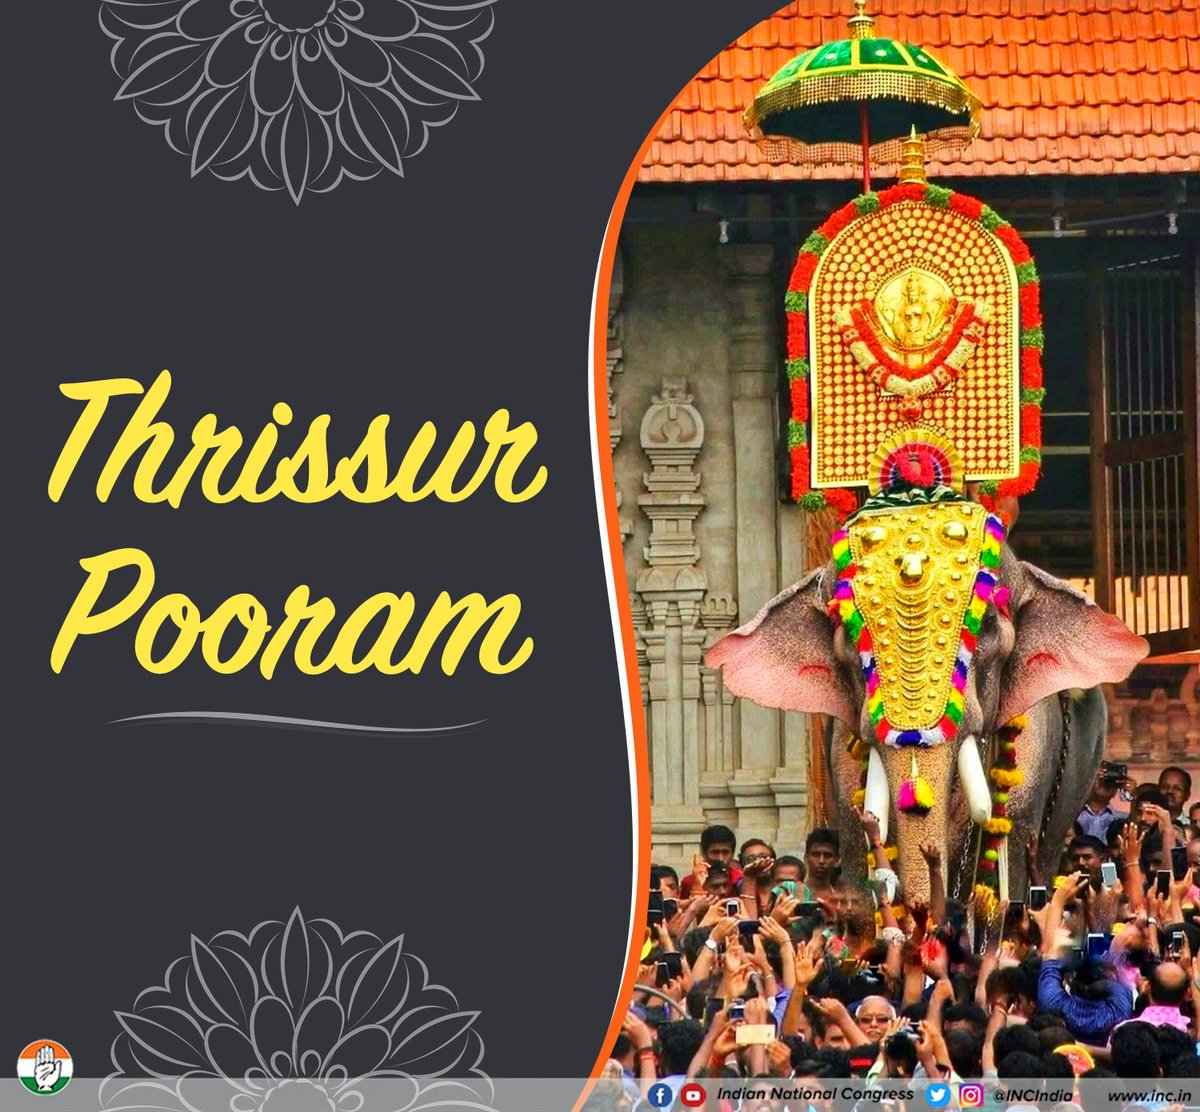 Hearty wishes to the people of Kerala on the festive occasion of Thrissur Pooram!
Full of vibrant colours, this spectacle of a festival includes procession of decorated elephants, traditional music and fireworks that together make this a grand extravaganza.